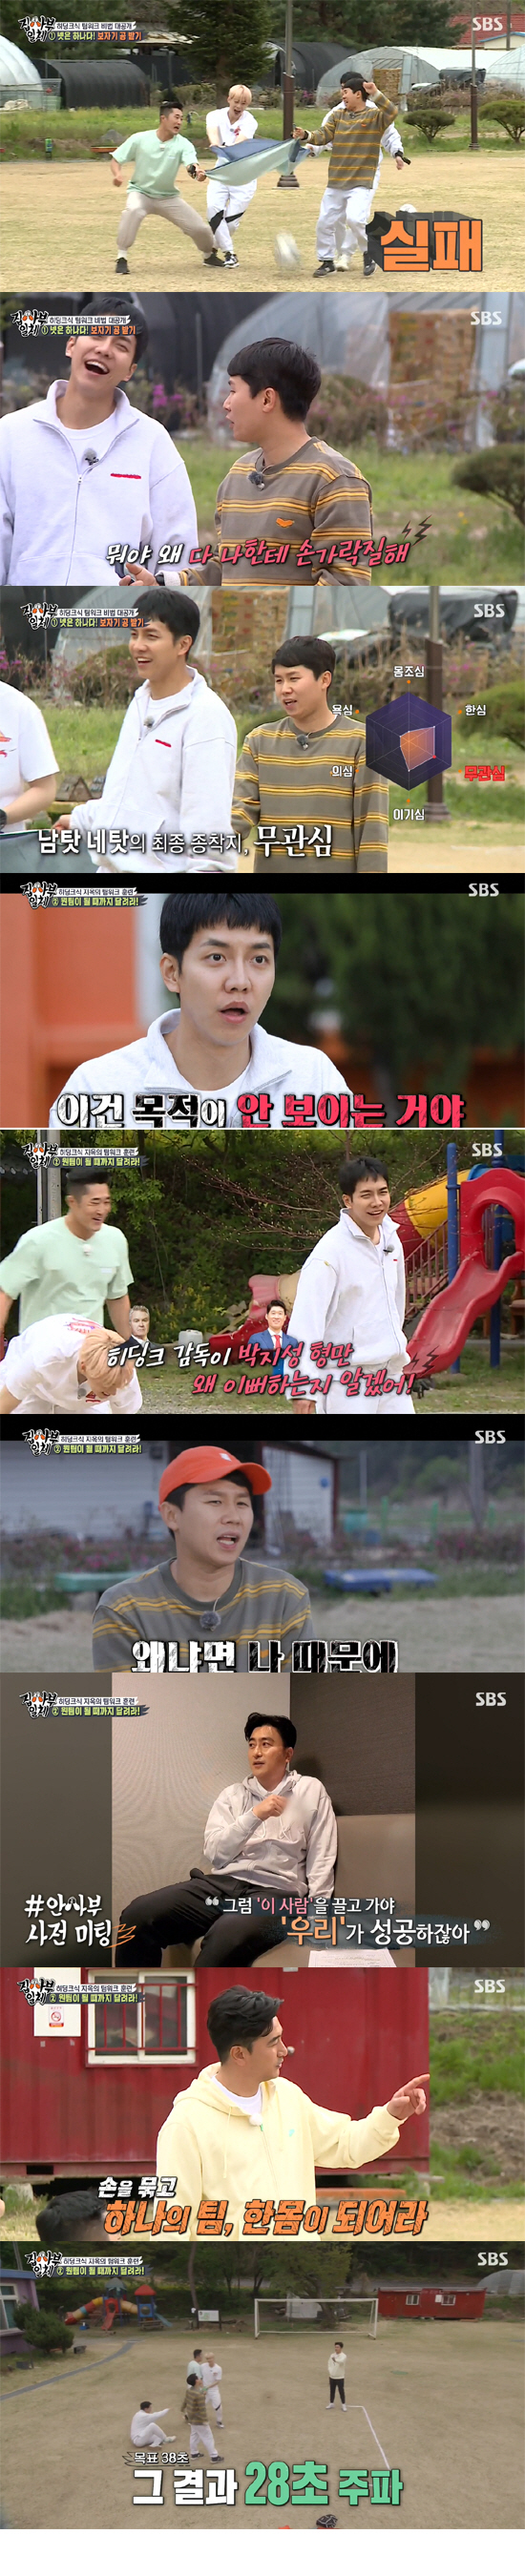 If I didnt get married fast, I would have been a Twisted Justice.Ahn Jung-hwan, a soccer player, said that the leader of the family is his wife, Lee Hye-won.In SBS All The Butlers broadcast on the 16th, Ahn Jung-hwan appeared as master after last week and emphasized the teamwork of the team.Ahn Jung-hwan said: Family life is a teamwork, too - dad or mom could be the leader of the family.It is also a team, he said, asking about the leader of the Ahn Jung-hwan family, saying, Of course, my wife Lee Hye-won. Ahn Jung-hwan said: Every time you do something strangely wrong, that position changes a lot; it keeps stacking up and it happens in an instant.I do not know why I have become such a leader, so the position of the leader has changed. I am glad that I married quickly.I would have been a Twisted Justice if I was alone because the environment I grew up was seductive. Ahn Jung-hwan also joked about his best friend Kim Sung-joo, saying, I do not like him very much.The first impression was not good, but unexpectedly good, said Kim Yong-man. Kim Yong-mans first impression was not good, but there is no reason to hate it.I really did not fit with me, but the more I know, the more I respect it. He said, I went on a trip on the air and Yongman was sick.I took care of him because I was a player, and he did not sleep with the air conditioner in the hot, and later he really appreciated that part. As for the future plans, he declared the bomb, I will not broadcast and do it until next year. The production team was also nervous.Lee Seung-gi asked, That fast? and Ahn Jung-hwan said, Once you think about it, thats what youre doing.It is not decided whether to go back to football or study, but it is a personal plan. If you stop suddenly (playing the broadcast) what youre doing, its a public affair, no, no, no, no, no, no, no, no, no, no, no, no, no, no, no, no, no, no, no, no, no, no, no, no, no, no, no, no, no, no,I do not think I can laugh, be handsome, sing or act well, or fight well. I may study to be a leader, but I am also worried about running the ground again. Ahn Jung-hwan said: I dont like talking about 2002, but then the teamwork was really good, the candidates are very heartbroken.But no one was impressed when the candidates were shown on camera. Everyone was a team.It is the best ace when you go to your team, but it is the result of sacrificing and caring for you. He emphasized the importance of the team once again.Lee Seung-gi said, There are several sports stars in Korea, but there is a speciality with the name of Ahn Jung-hwan.Park Ji-sung is different from his brother, but when Park Ji-sung is Hero, Ahn Jung-hwan is a star. Ahn Jung-hwan said, Who does not heal?Why do I come out and pick up Park Ji-sung? He said, I am a brother if I have more money than me.The cooler footballer than Ronaldo Messi is Ahn Jung-hwan, said Cha Jung Eun-woo, who received the pass of Ahn Jung-hwan.Earlier, Ahn Jung-hwan started training for four people to get the ball together.Members pointed at the same time and Yang Se-hyeong was crooked when Yang Se-hyeong missed the ball due to poor performance.The training followed the mission of four members in 20 seconds of Exercise. The members resigned to the slower record as they tried to run to the chin.Lee Seung-gi said, I thought you hated Hiddink. We are not going to the World Cup.Ahn Jung-hwan tied the wrists of four people and gave them 38 seconds, saying, A fast person should push and do it behind.The four men passed the mission with 25 seconds as a member came out to play outside while placing the unable Yang Se-hyeong inside and caring.Yang Se-hyeong, who was the most sluggish, cheered, I am not alone, but Yi Gi, so I think it is so joyful.All The Butlers members accused Hiddink of hating him when he was a player, I think thats true, and Ahn Jung-hwan said, I hate it?Thank you, he said.Yang Se-hyeong said, I am sorry that I am the worst.I feel more grateful for the members to attract, Ahn Jung-hwan advised. It is a training to feel that. Kim Dong-Hyun said, When I originally ran, I saw the side while watching the hard work of the three types. Ahn Jung-hwan said, I also care for each other.They build up a team that they can not play outside. Teamwork happens. It is a true team when it is hard. Lee Seung-gi said, We are so hard, but it would have been harder when we were players. Ahn Jung-hwan said, I went to the shower to wash after training, but the secretion on my pants ... I felt it.Im literally a liar, said Jung Eun-woo, who said, I cant smell it, and its weird. Smell-no-deaf.I cant hear a single one with 50,000 people sitting there, said Lee, who was using his extreme physical strength during his career.All The Butlers team ate the white soup prepared by Ahn Jung-hwan and wanted to eat ramen noodles. They took the ingredients from Yang Se-hyeong tea, tied their hands, fed each other, and ate ramen noodles deliciously.In subsequent training, Ahn Jung-hwan promised to let me out of the afternoon training if the four people were Yi Gi, and the members were burned to resolution.The four men who tied their hands played football penalty battle with Ahn Jung-hwan, and Ahn Jung-hwan, who kicked the ball with his left foot, eventually lost the winning goal.Ahn Jung-hwan said, There is no individual stronger than the team.There will be no teamwork like All The Butlers among all the entertainment teams, said Jung Eun-woo. It is Feelings who became a more team with their brothers today.